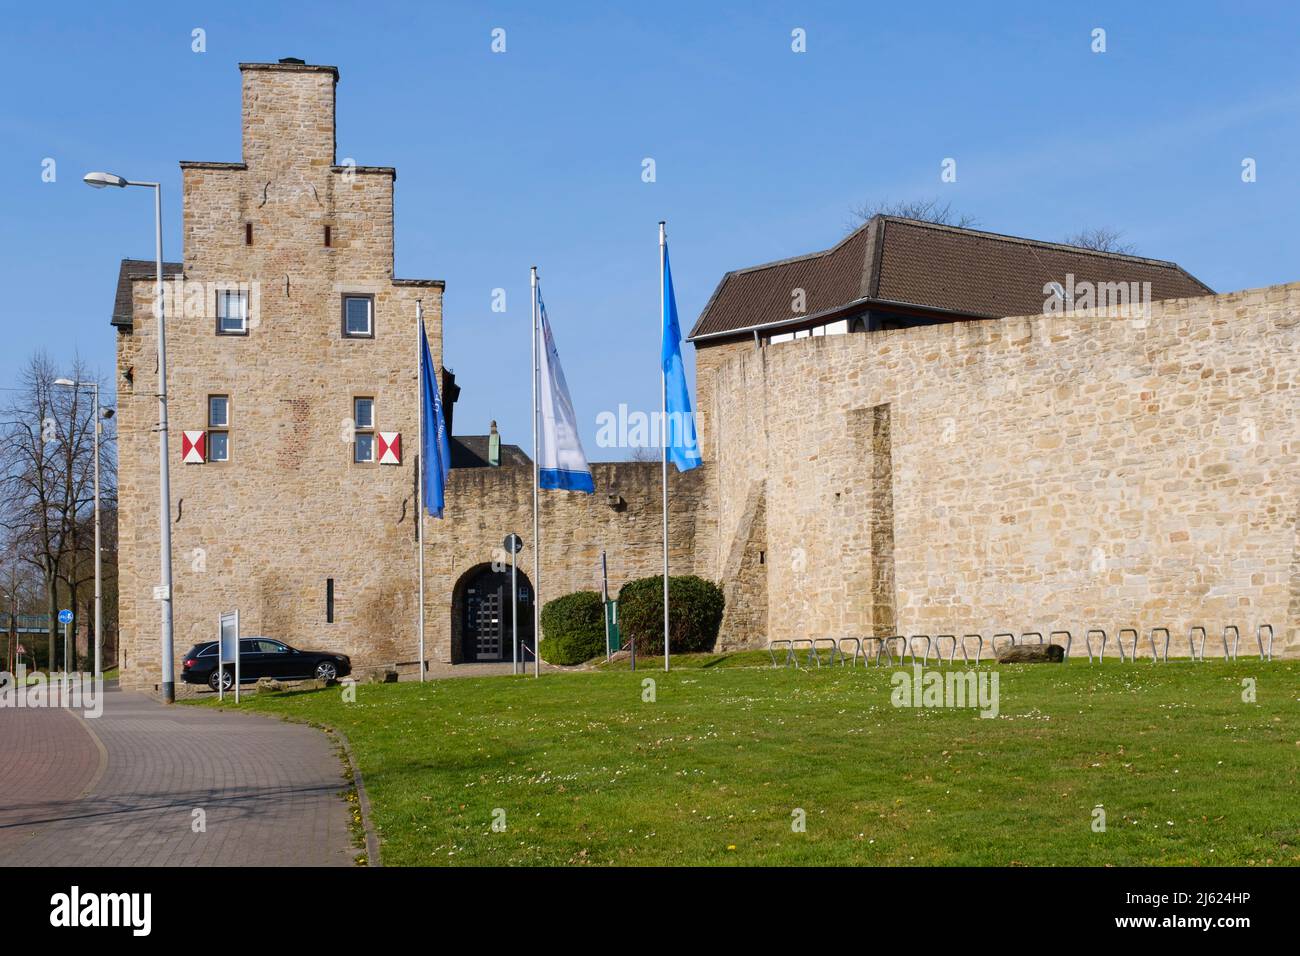 Germany, North Rhine-Westphalia, Mulheim an der Ruhr, Street lights and flagpoles in front of Broich Castle Stock Photo